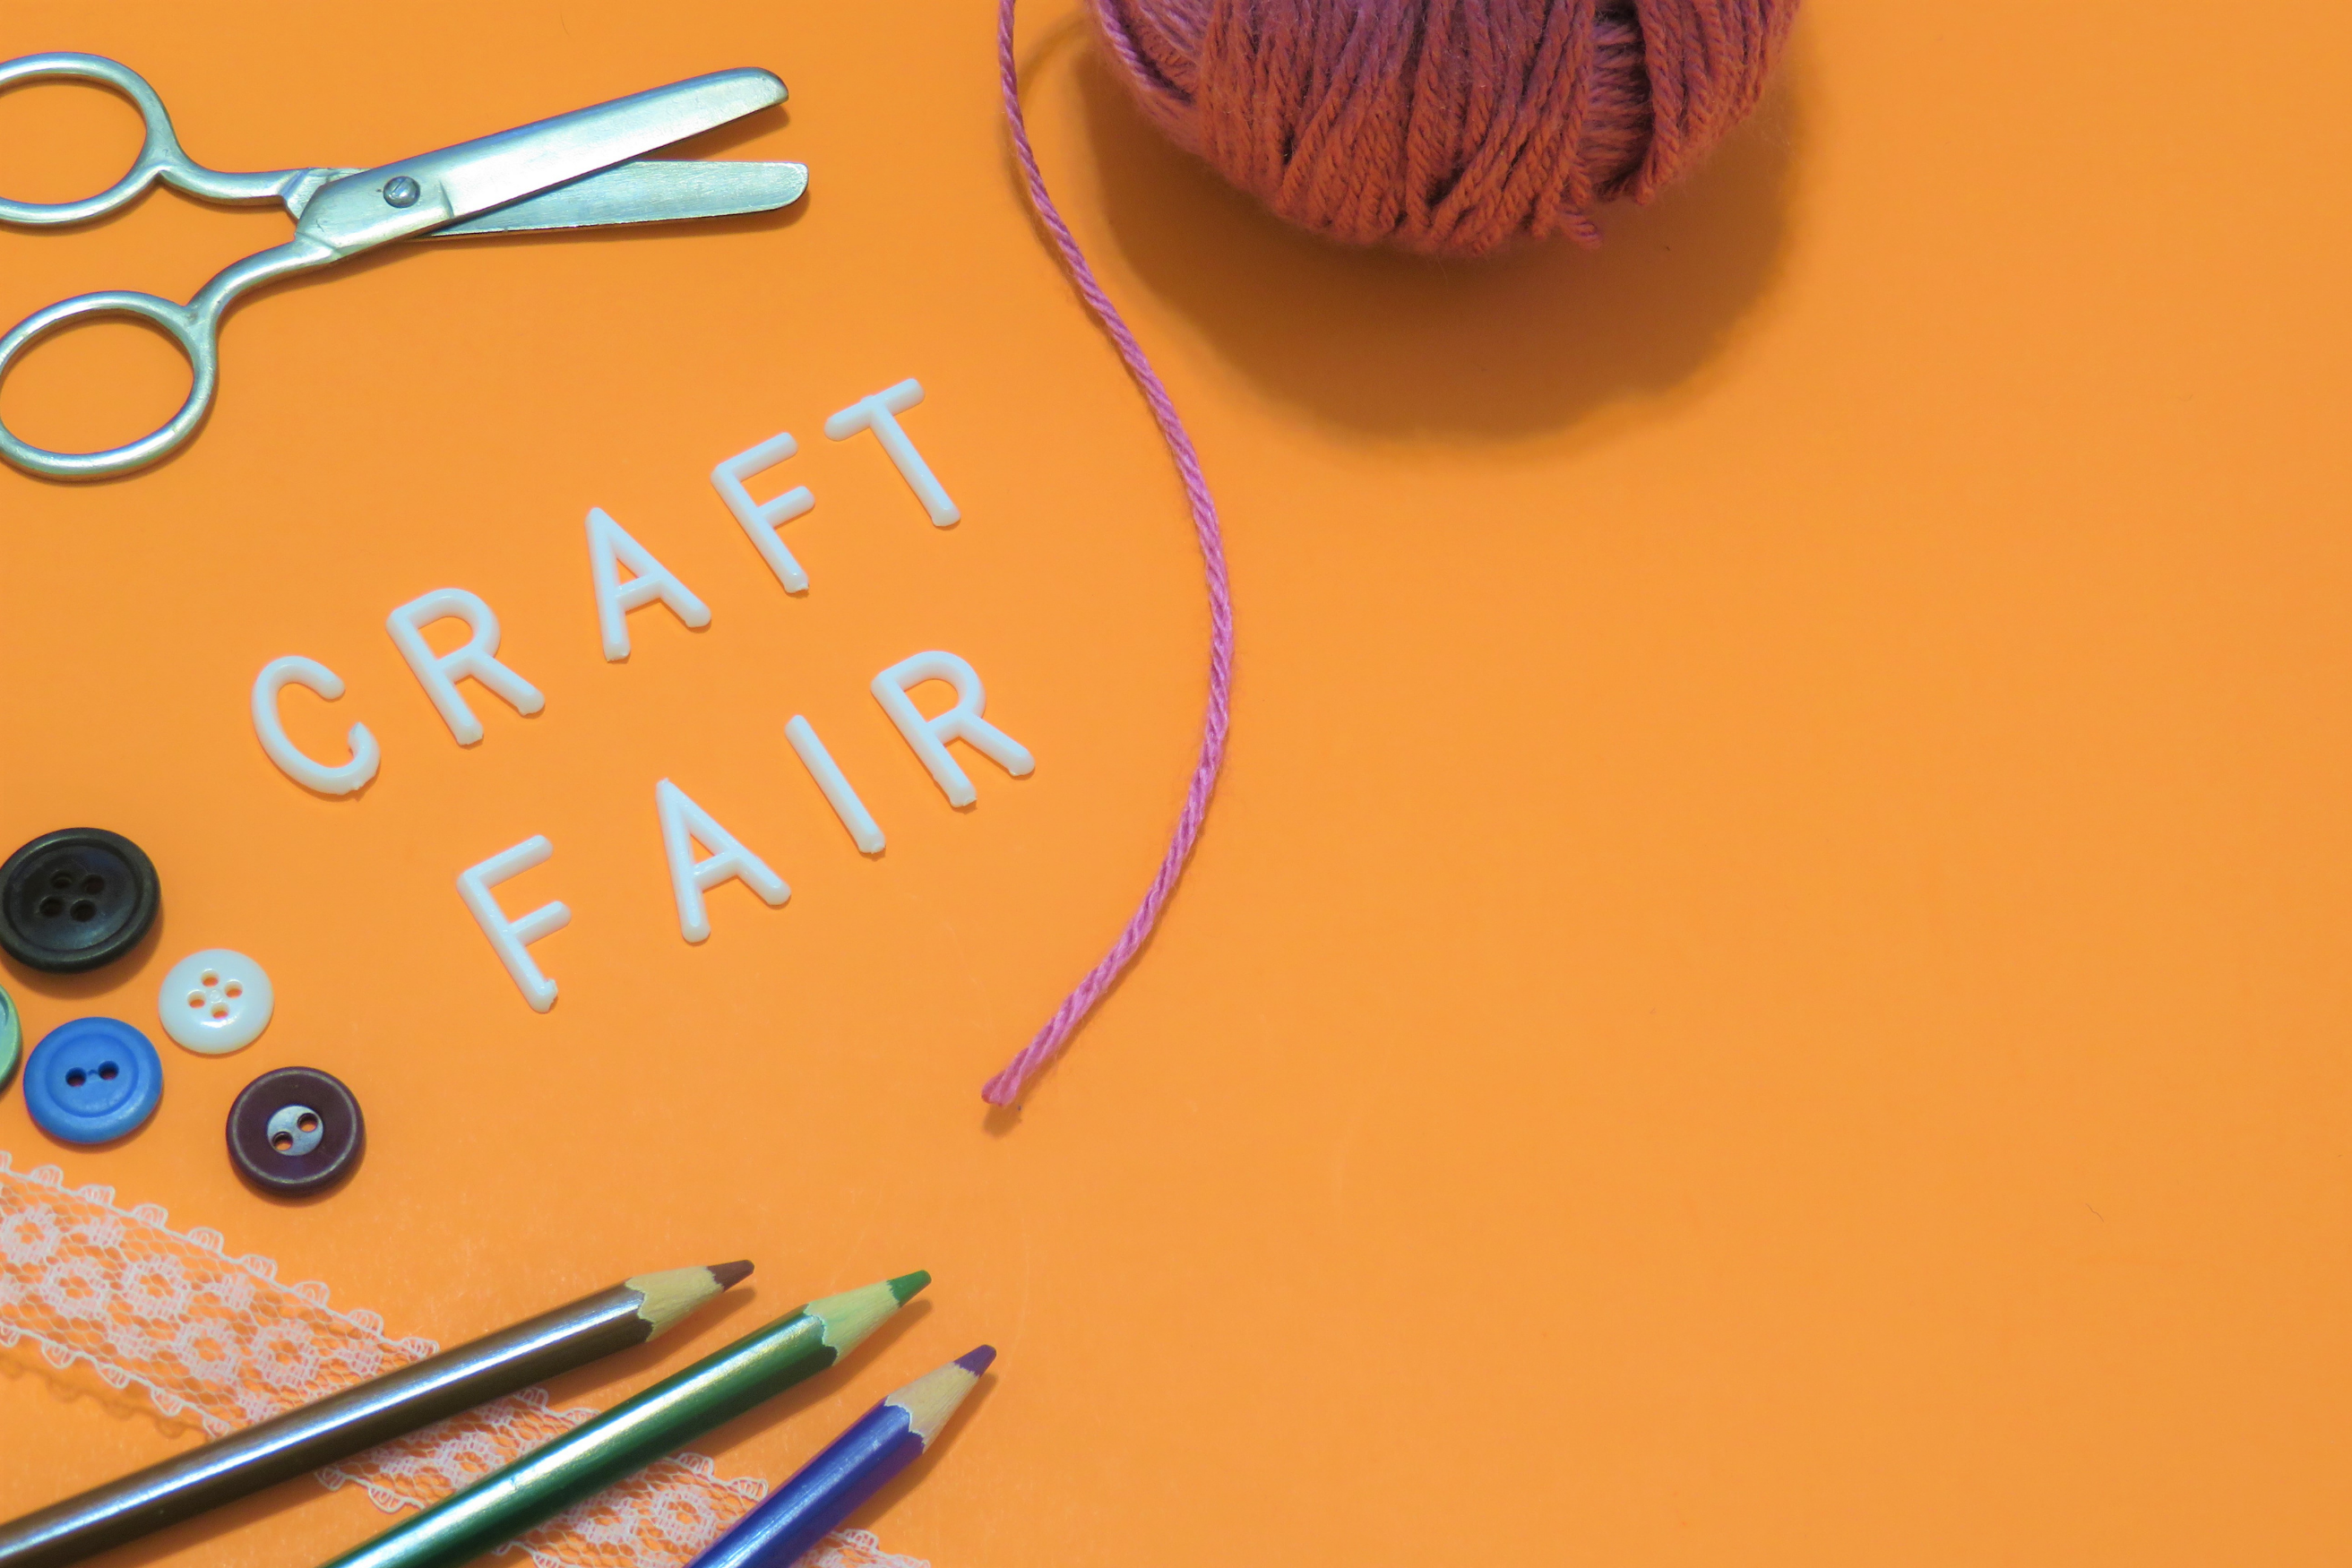 How to Find Local Craft Fairs Near You